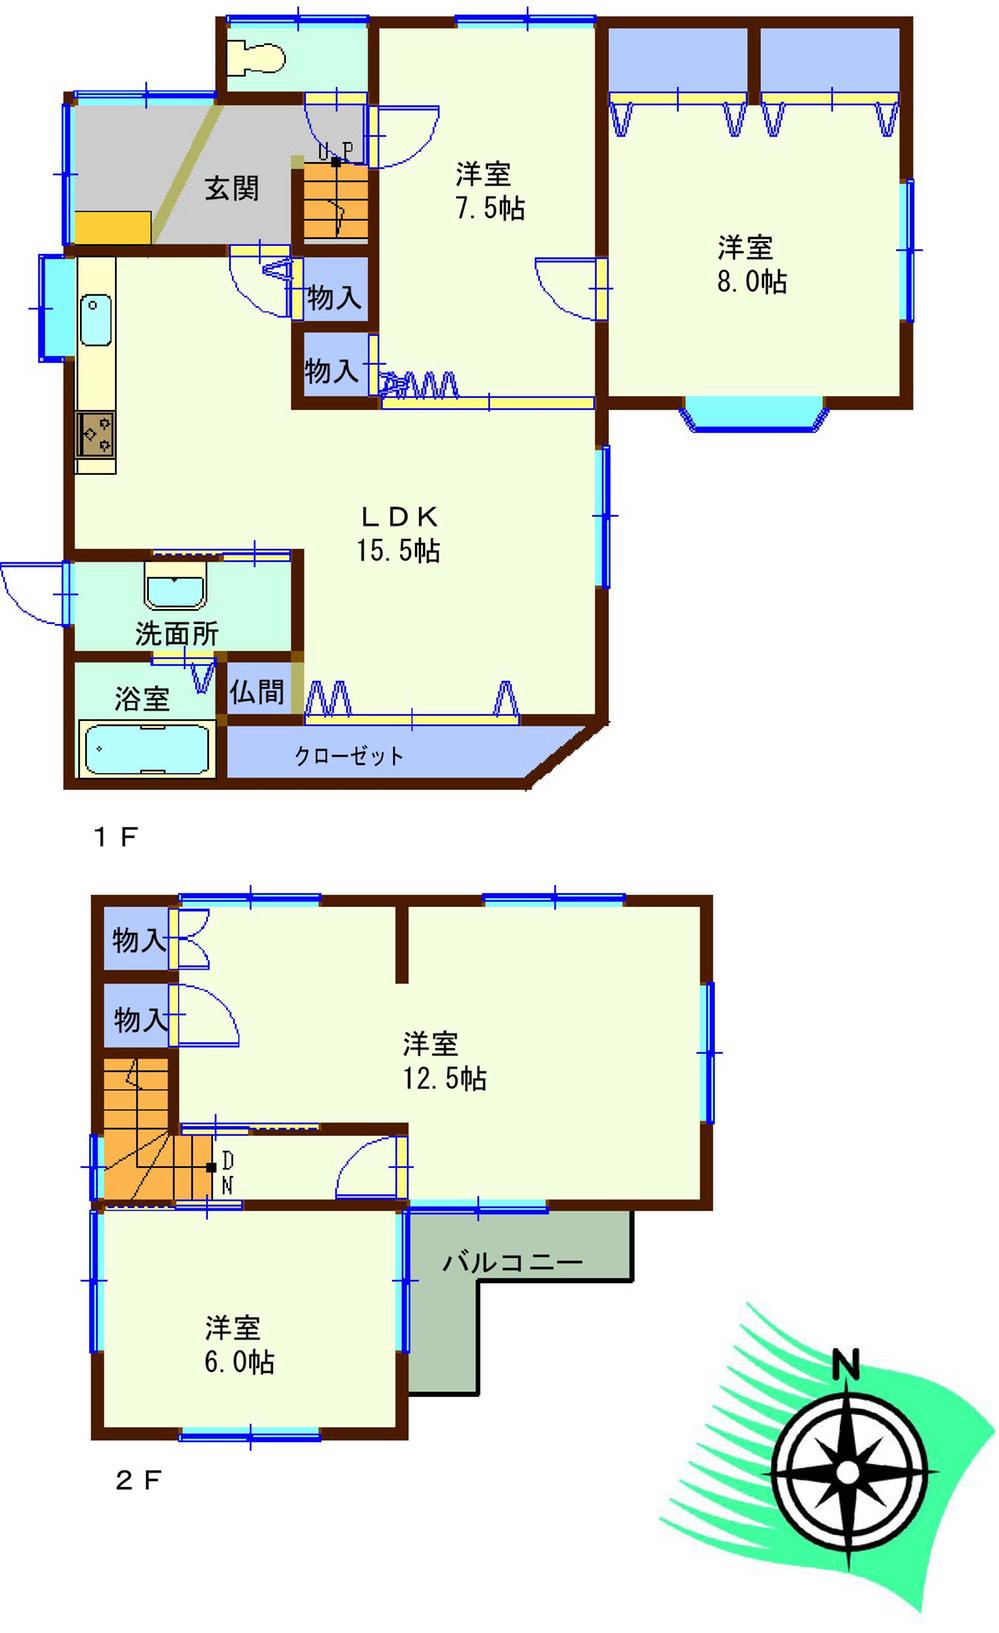 Floor plan. 12.8 million yen, 4LDK, Land area 182.05 sq m , It is a building area of ​​113.44 sq m easy-to-use floor plan. 